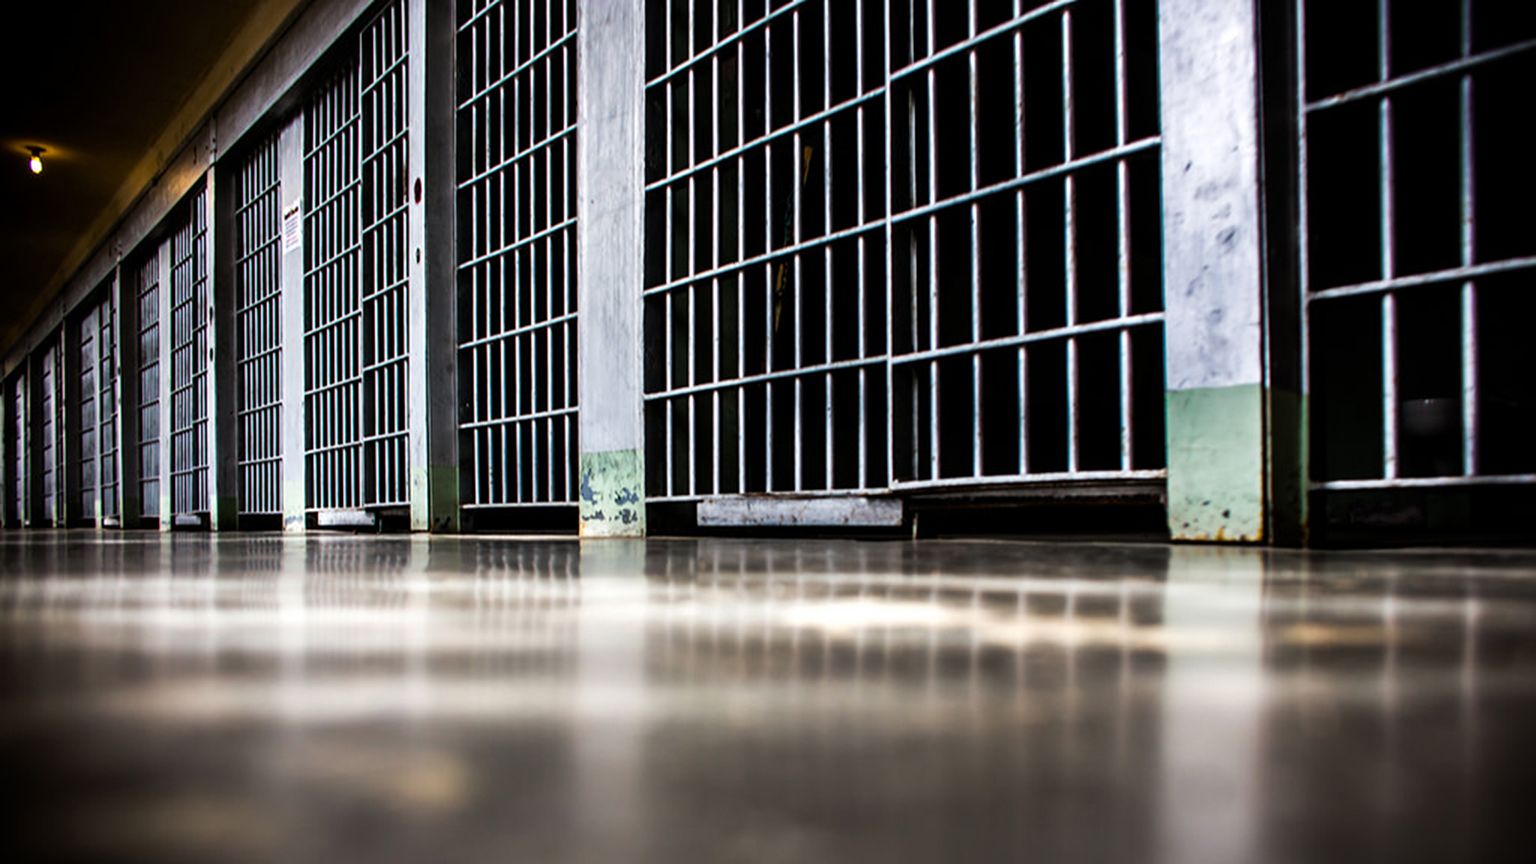 LGBTQ Publication Suing Illinois Prison Officials Over Censored Materials